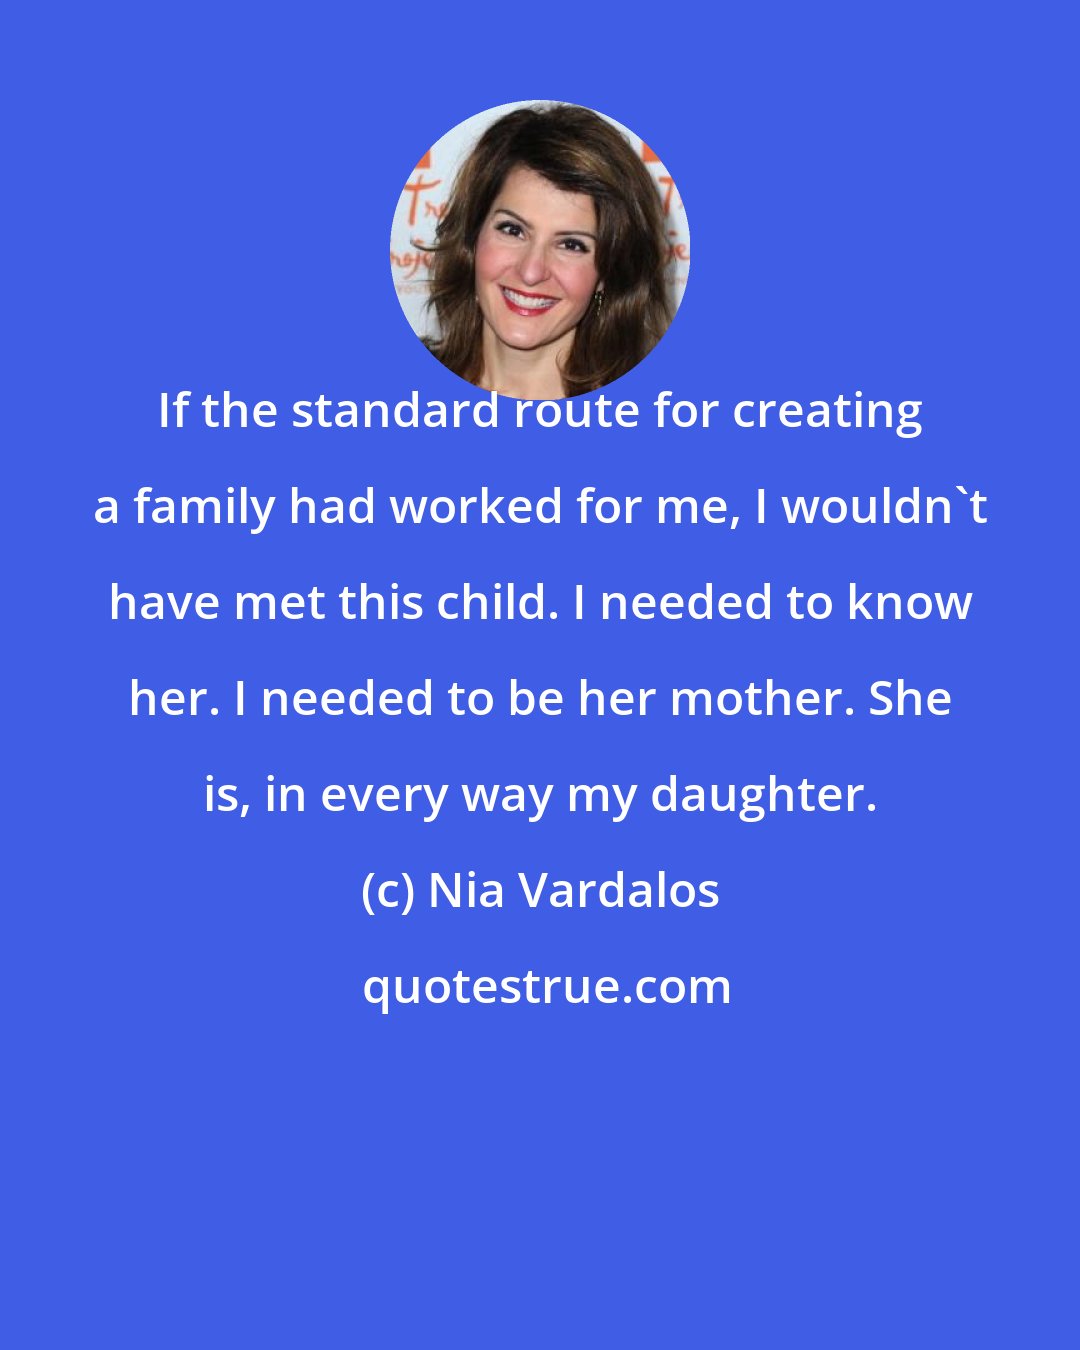 Nia Vardalos: If the standard route for creating a family had worked for me, I wouldn't have met this child. I needed to know her. I needed to be her mother. She is, in every way my daughter.